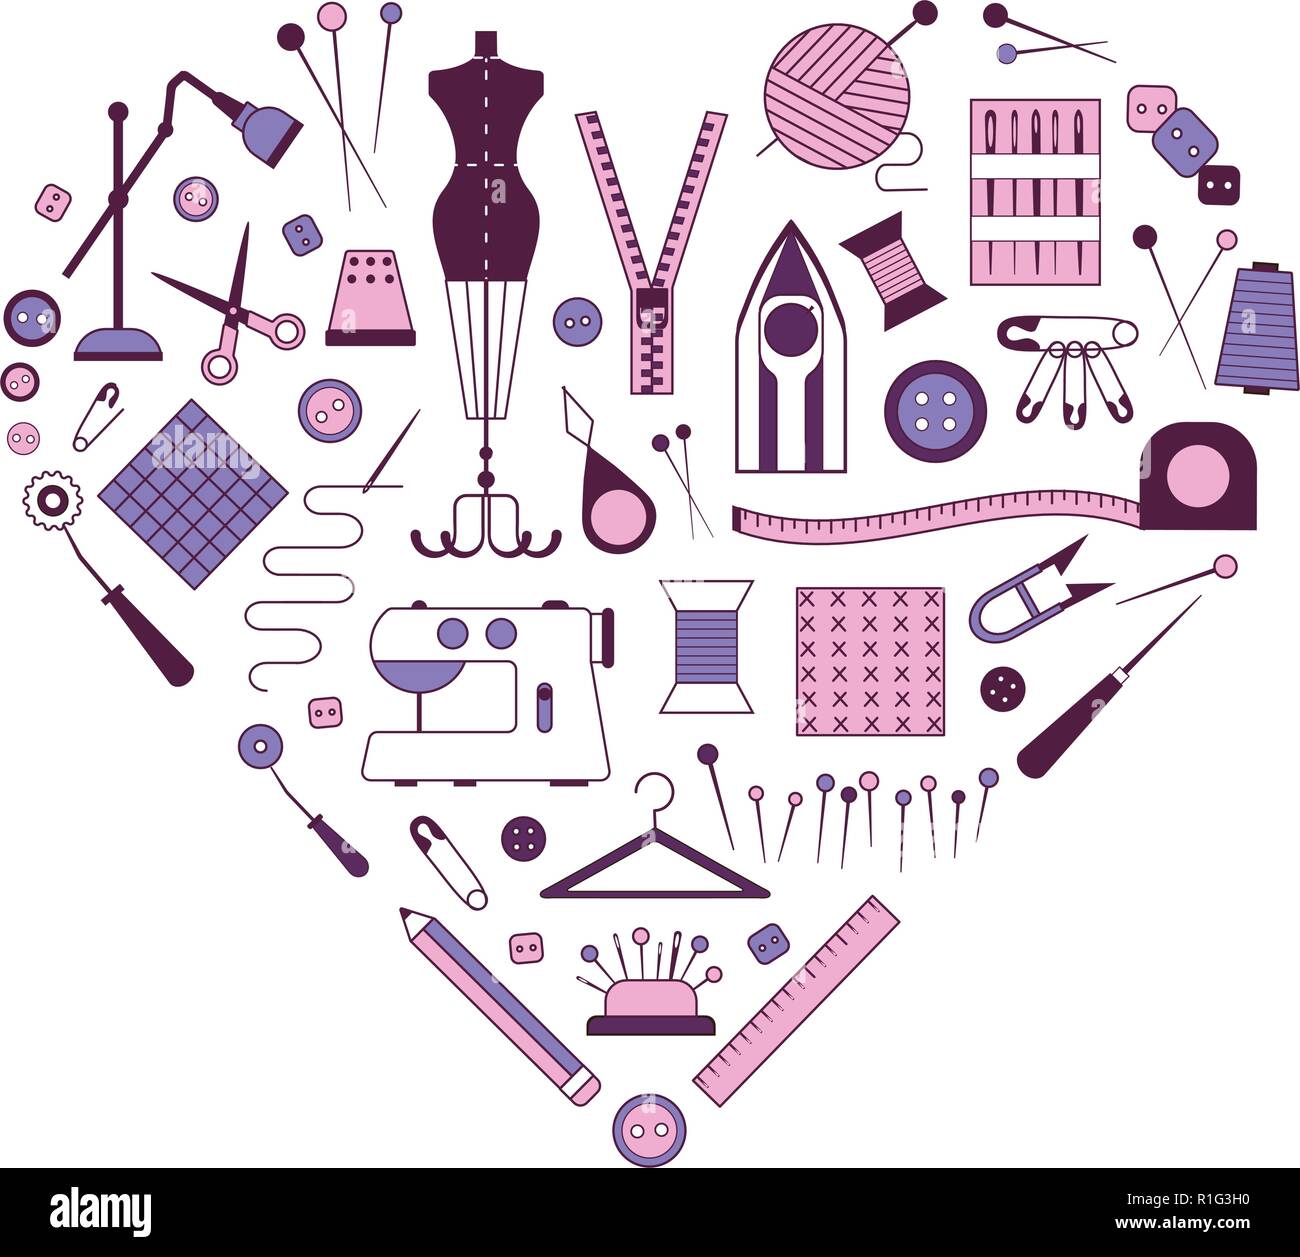 Tools and materials for sewing Royalty Free Vector Image